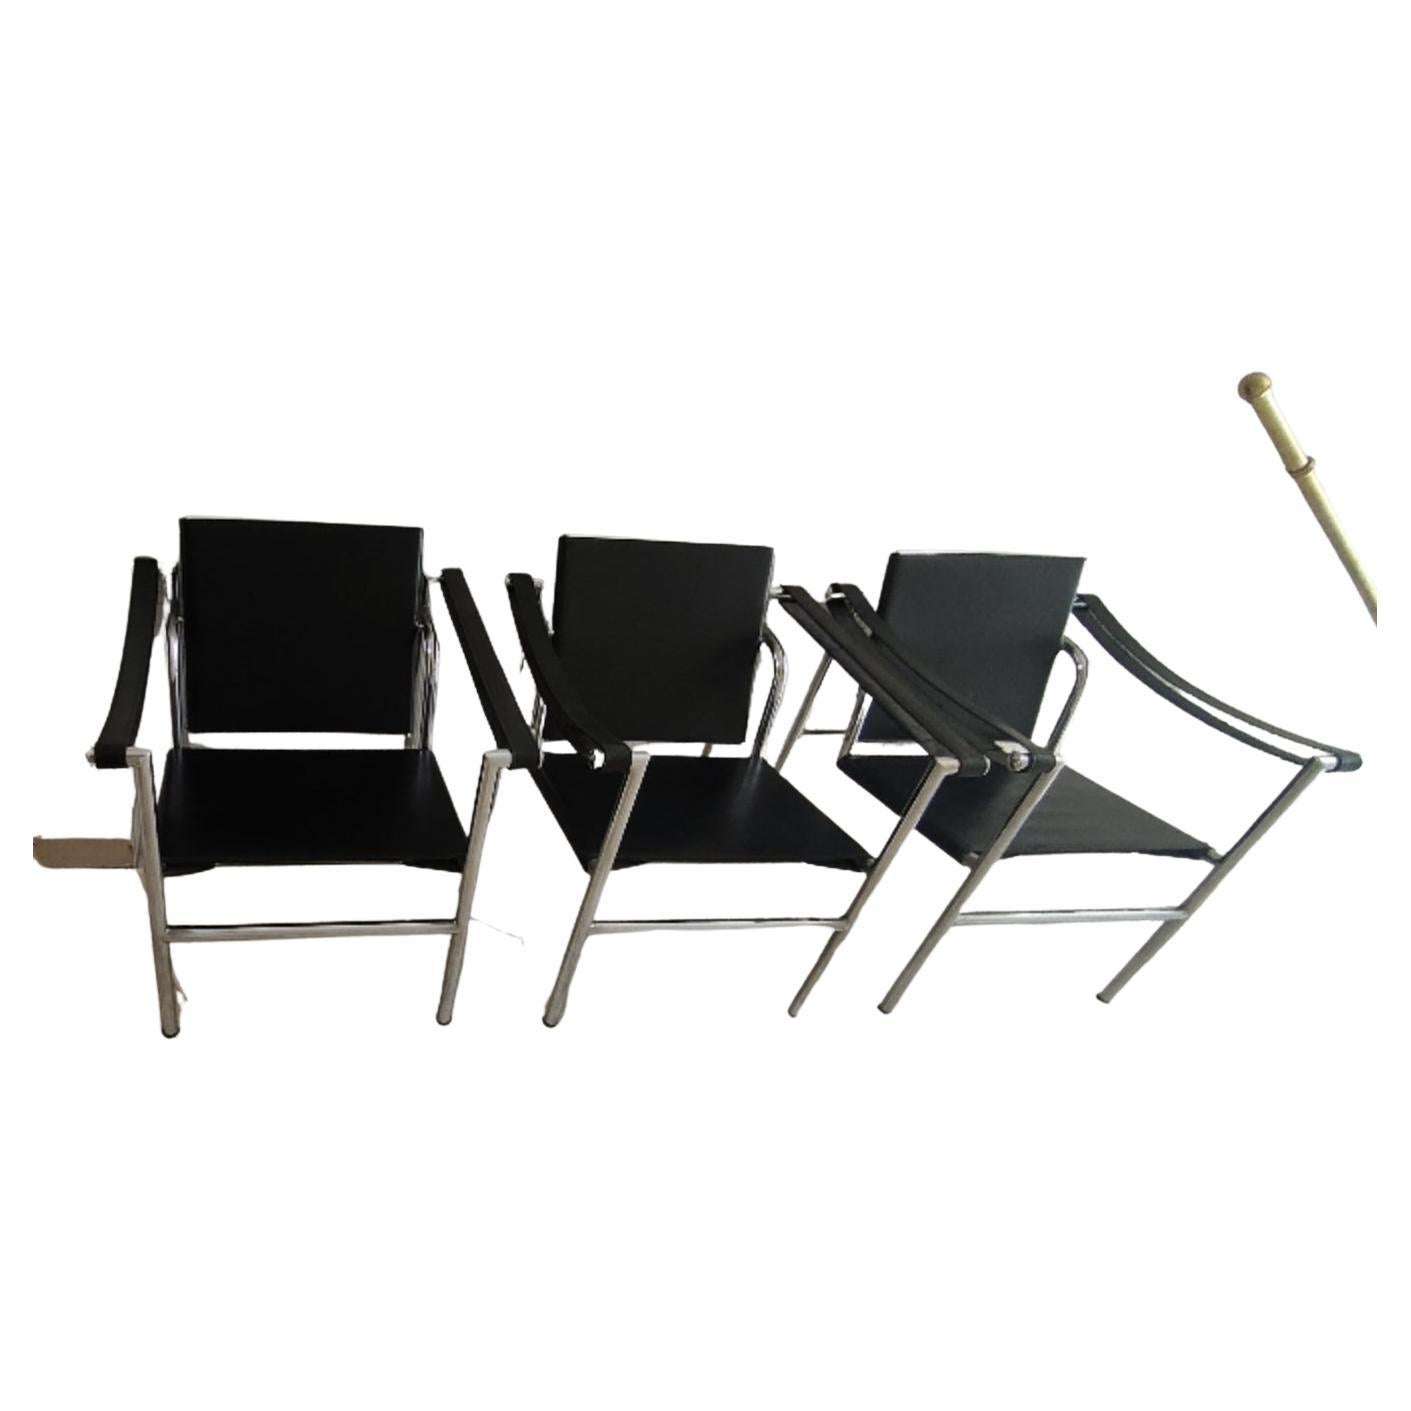 3 Armchairs mod. LC 1 1970s Le Corbusier  - Cassina -Made in ITALY